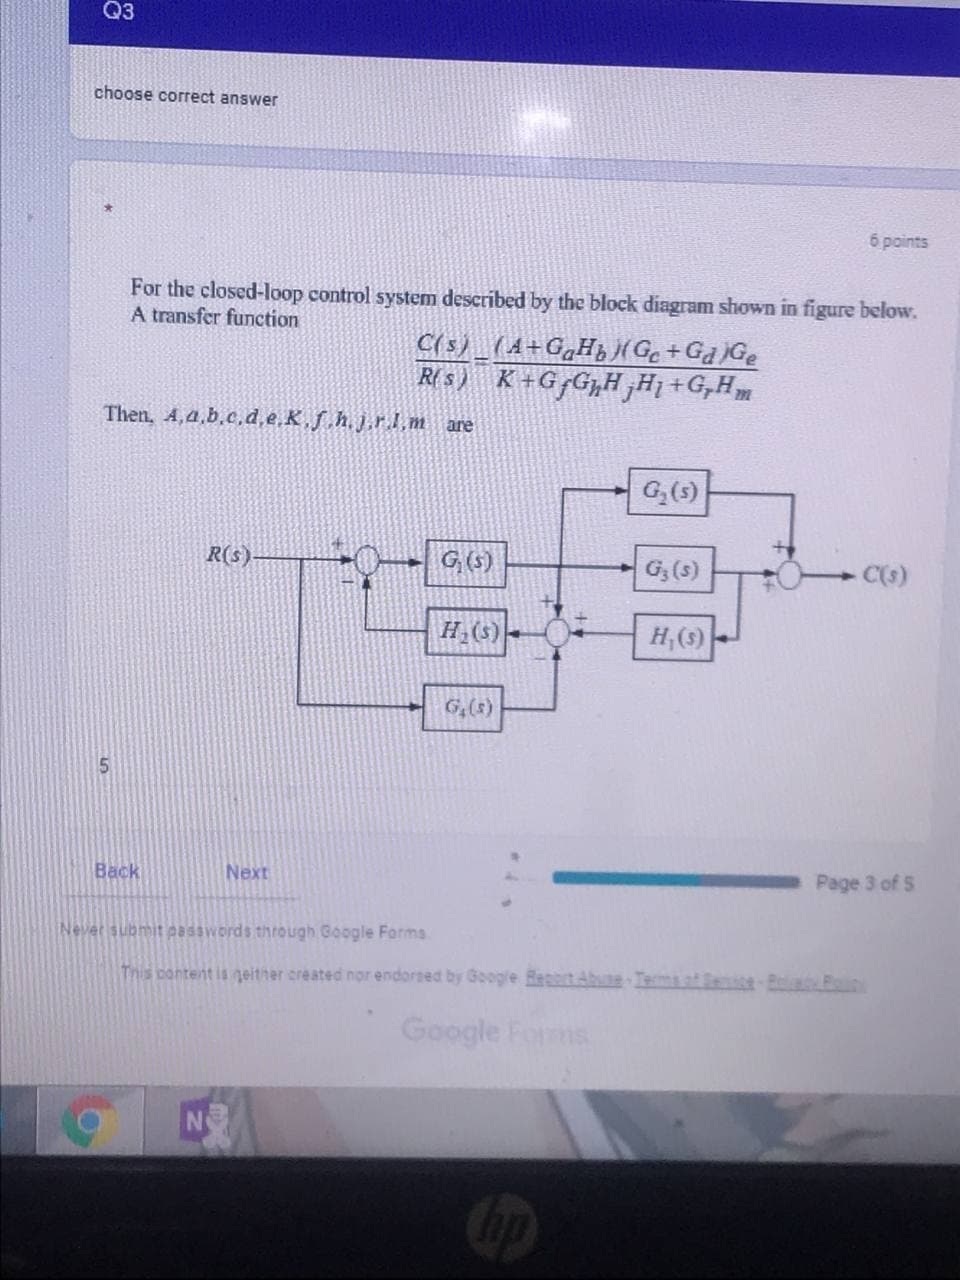 Q3
choose correct answer
6 points
For the closed-loop control system described by the block diagram shown in figure below.
A transfer function
C(s)_(A+G„Hj(Ge+Ga )Ge
R( s) K+G G„H,Ħ1 +G,H
Then, 4,4.b.c.d,e.K,f h.j.r.l.m are
G,(5)
R(s)
G (5)
G,(s)
C(s)
H(S)-
H,(9)
G,(8)
5.
Back
Next
Page 3 of S
Never submit easswords through Google Forms.
This pontent is geither created nor endorsed by Google Reit Abune Tema af eice-Bola n
Google Forms
